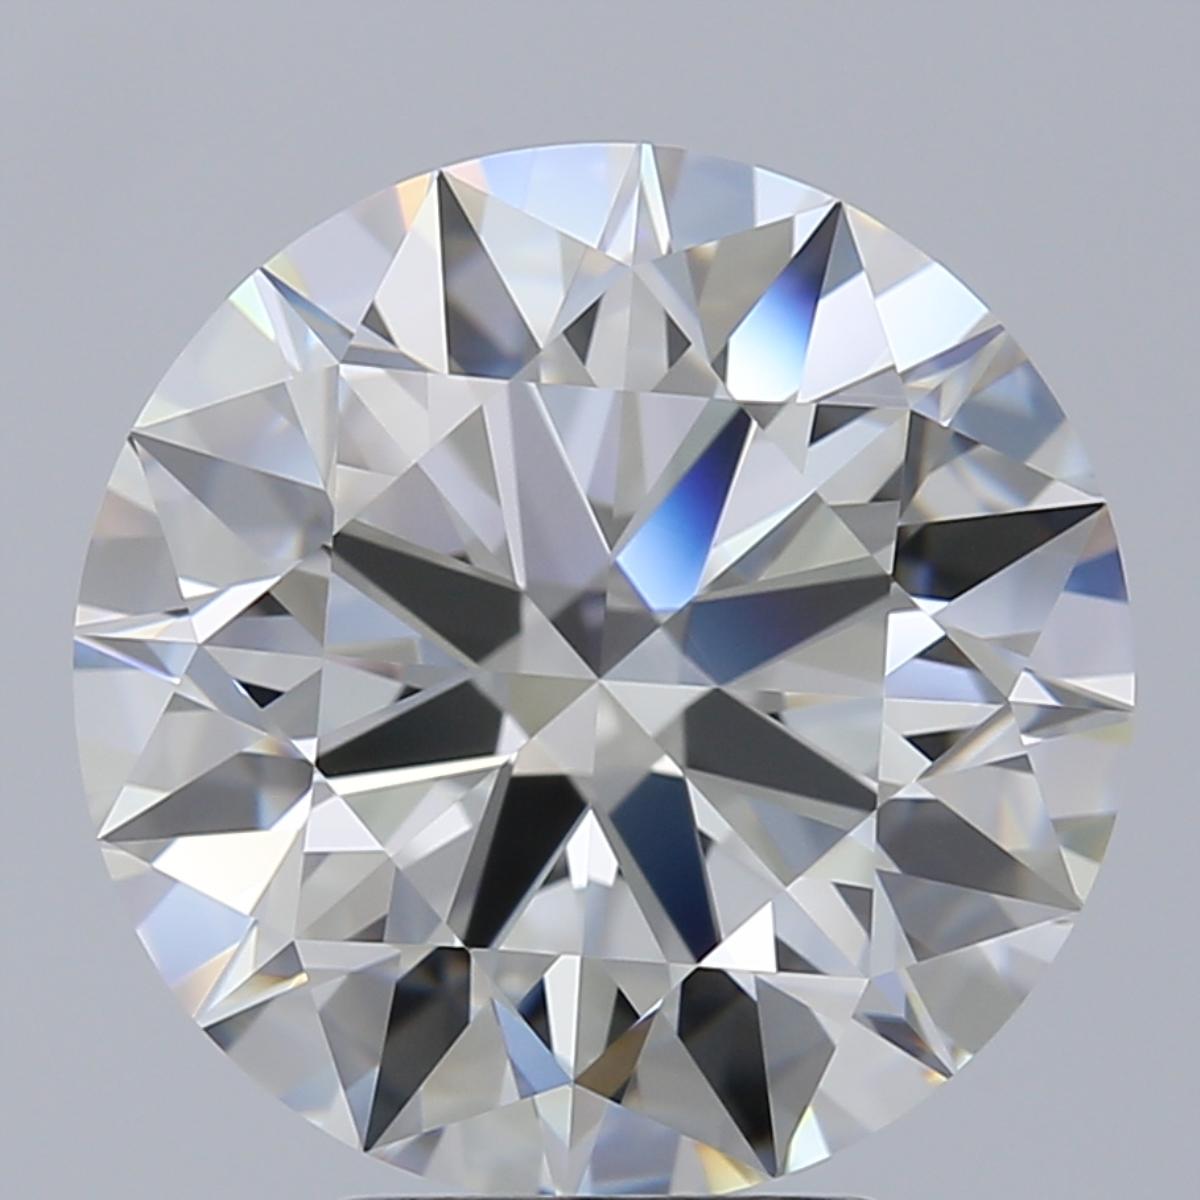 GIA Certified 4.00-4.10 Carat, G-F/VVS1, Brilliant Cut, Excellent Natural Diamond

Perfect Brilliants for perfect gifts.

5 C's:
Certificate: GIA
Carat: 4.00-4.10ct
Color: G-F
Clarity: VVS1(Very Very Slightly Included)
Cut: Excellent
Polish: